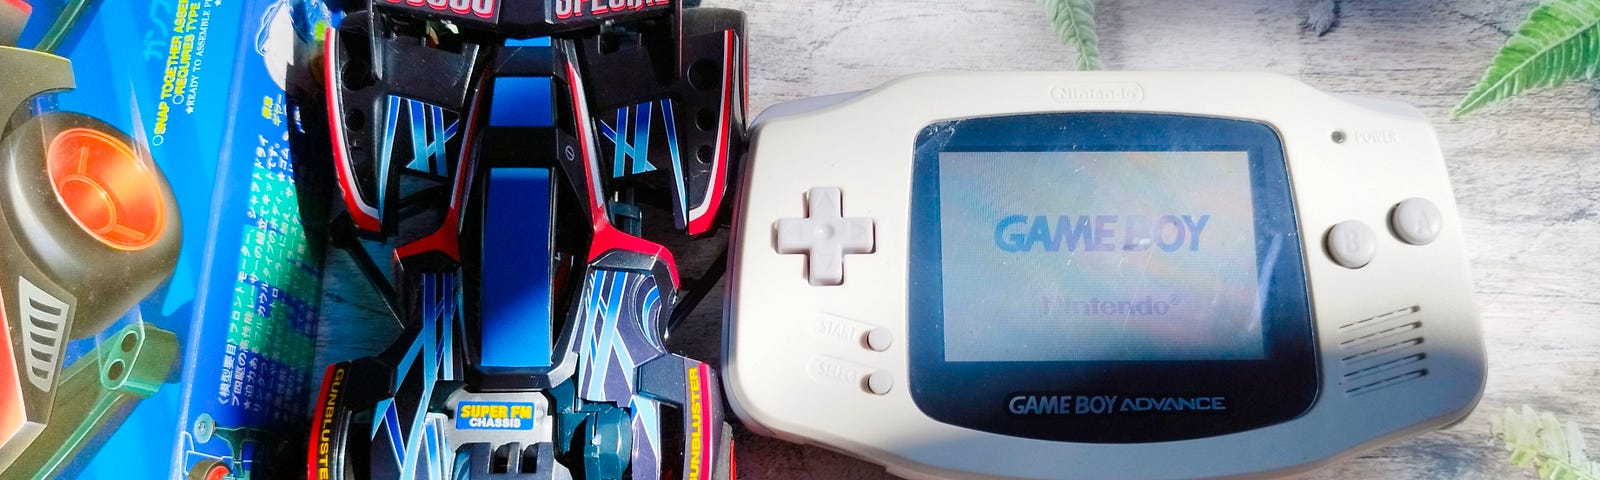 A Tamiya toy car and a Game Boy Advance on top of a table